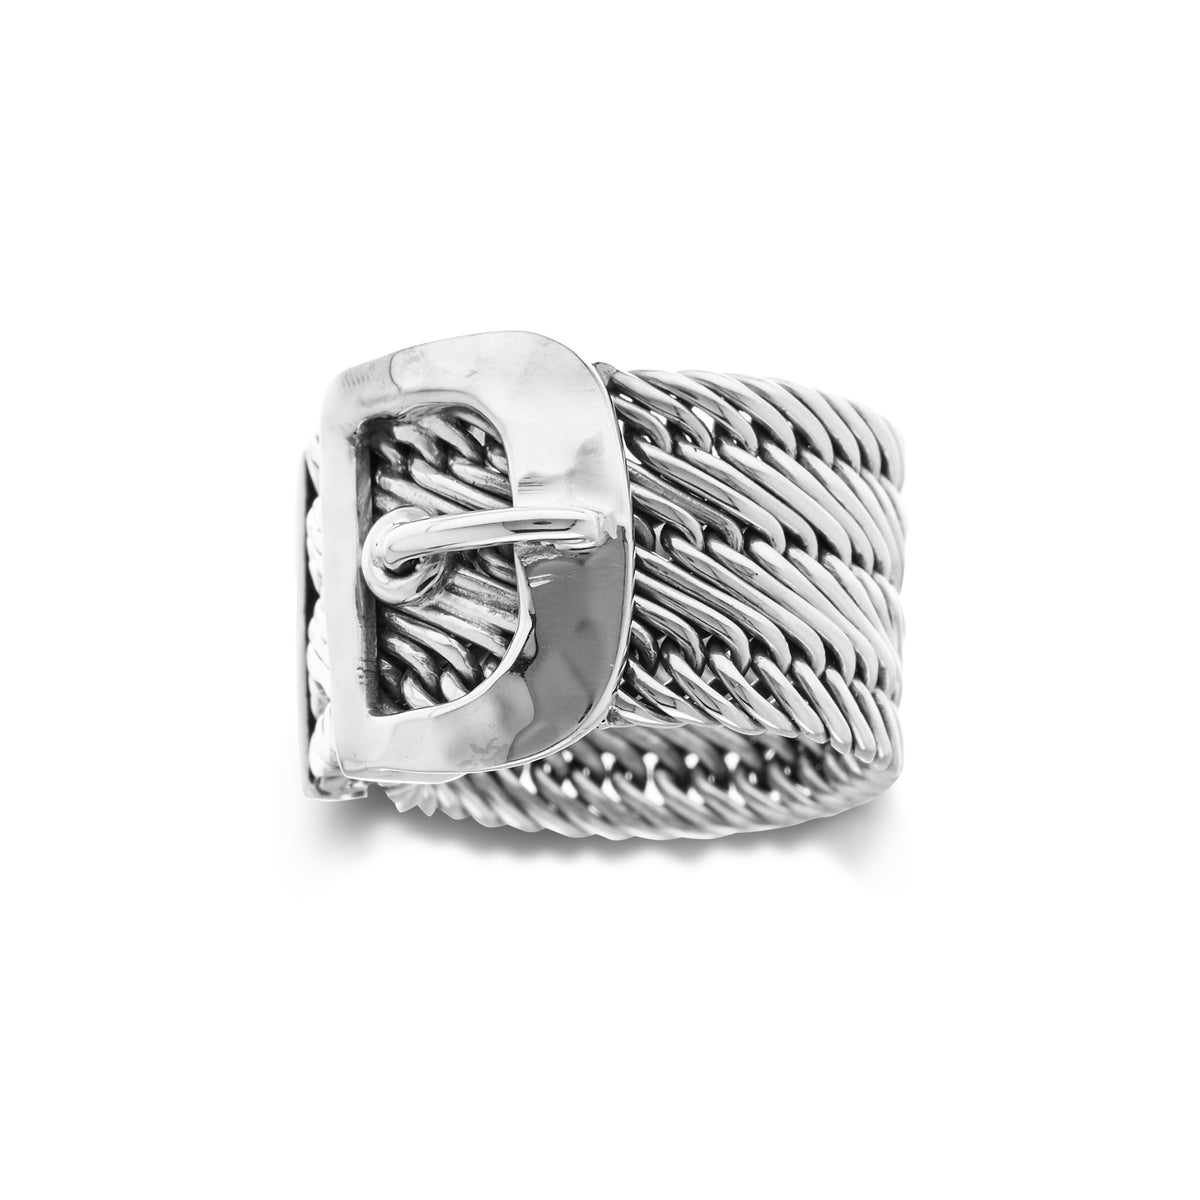 Single Wire Weave with Belt Buckle Center Ring - Lois Hill Jewelry